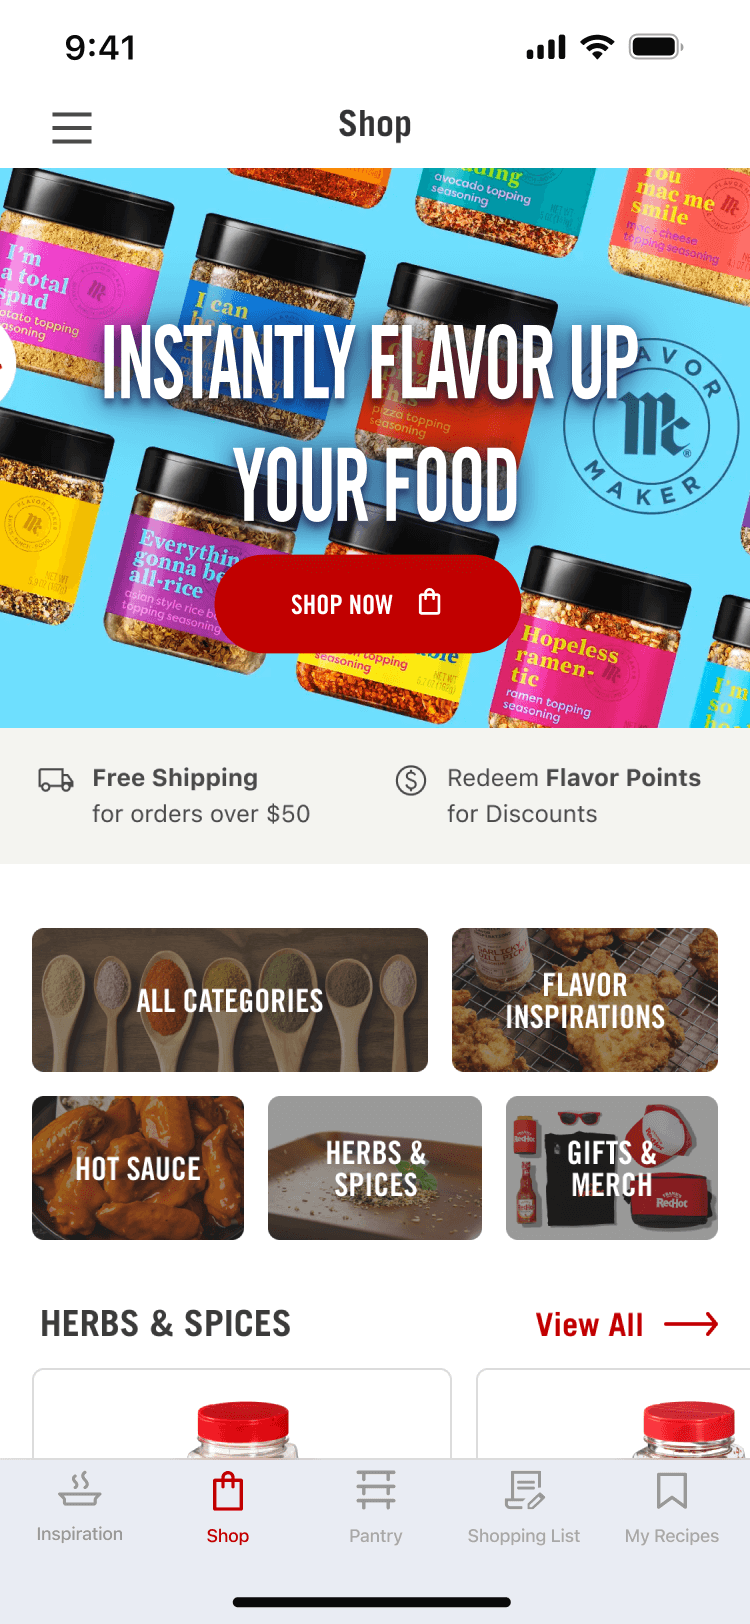 McCormick app screen displaying a shop interface with a banner reading "Instantly flavor up your food." Below the banner are categories for spice products with thumbnails and various options like herbs, spices, and special offers.